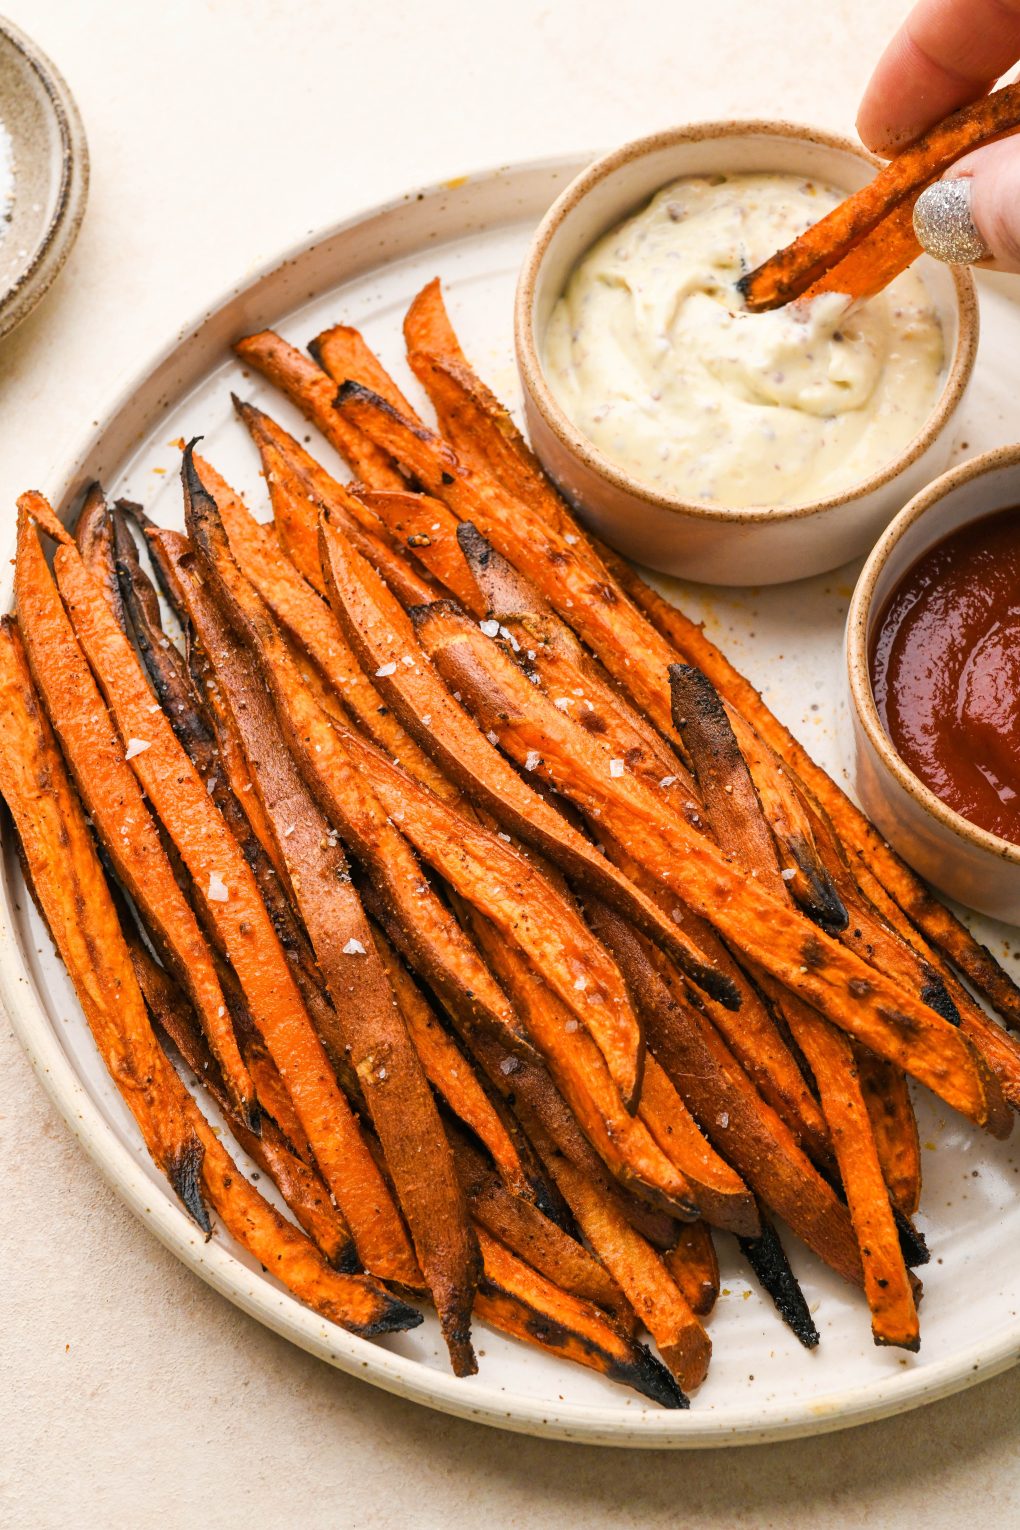 A large speckled plate filled with crispy roasted sweet potato fries with a hand dipping several fries into aioli. On a light cream colored surface.